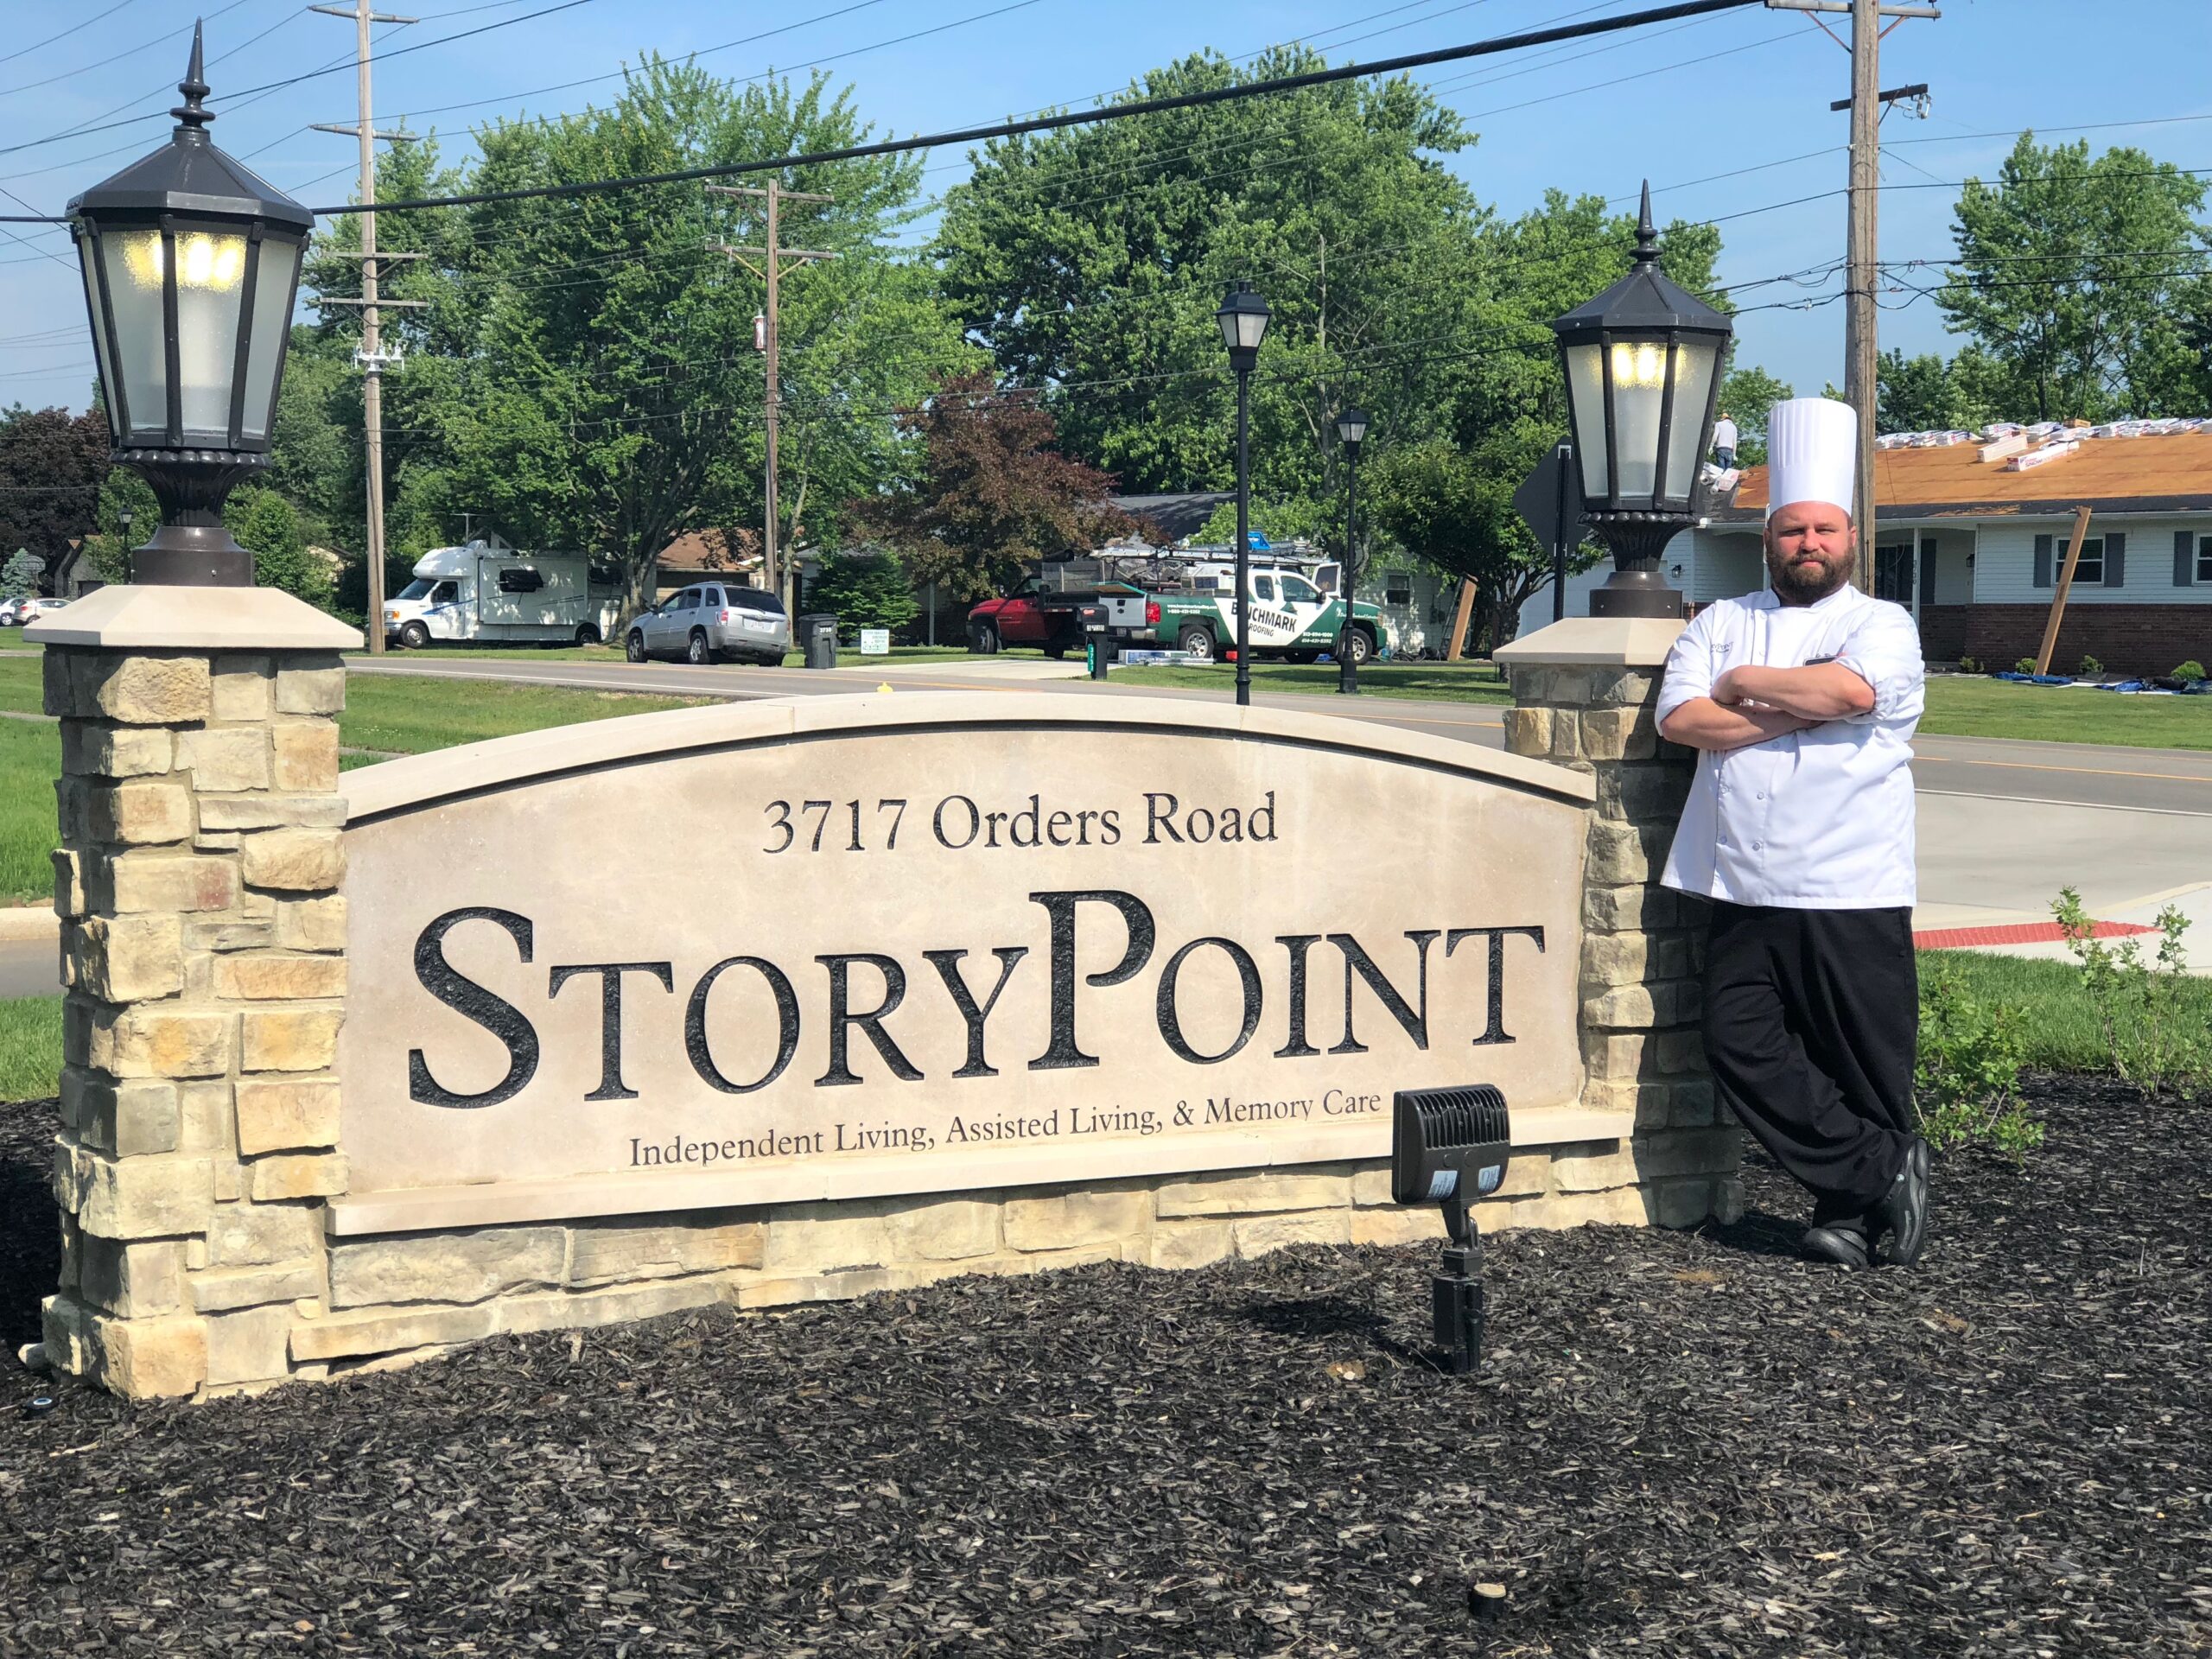 Meet StoryPoint Grove City’s Chef Kyle